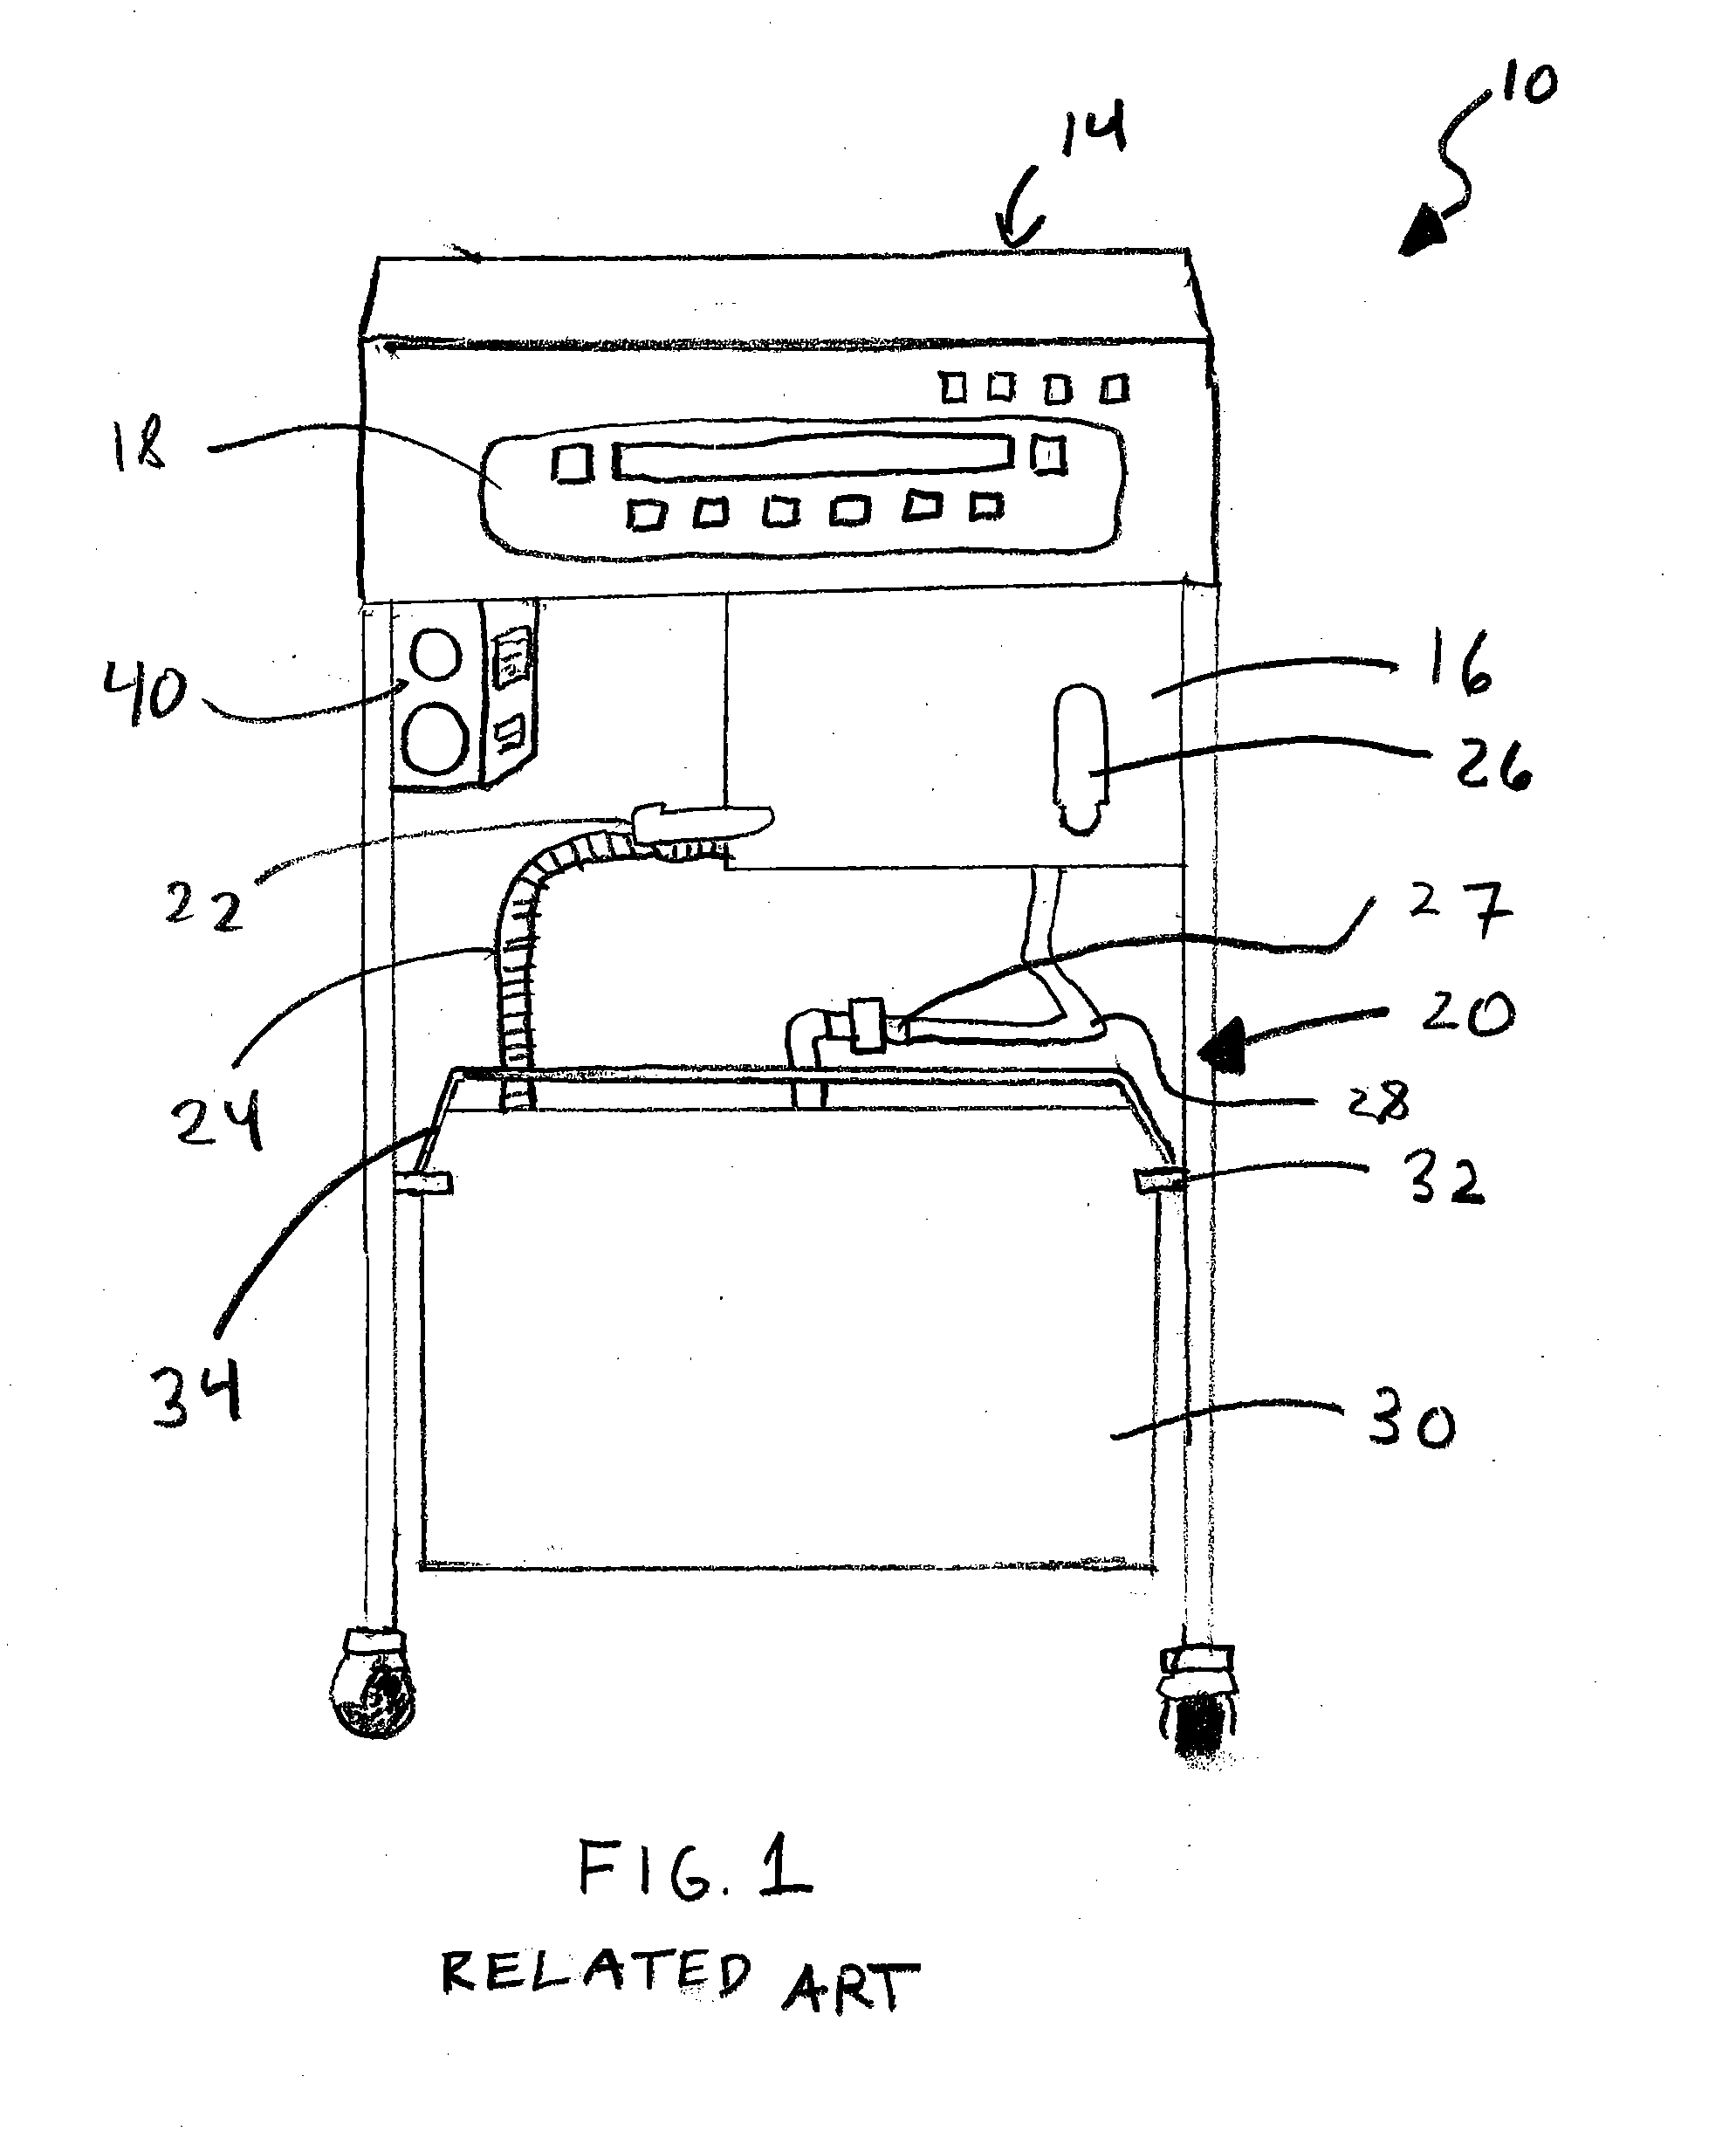 Automatic cooking medium filtering systems and methods